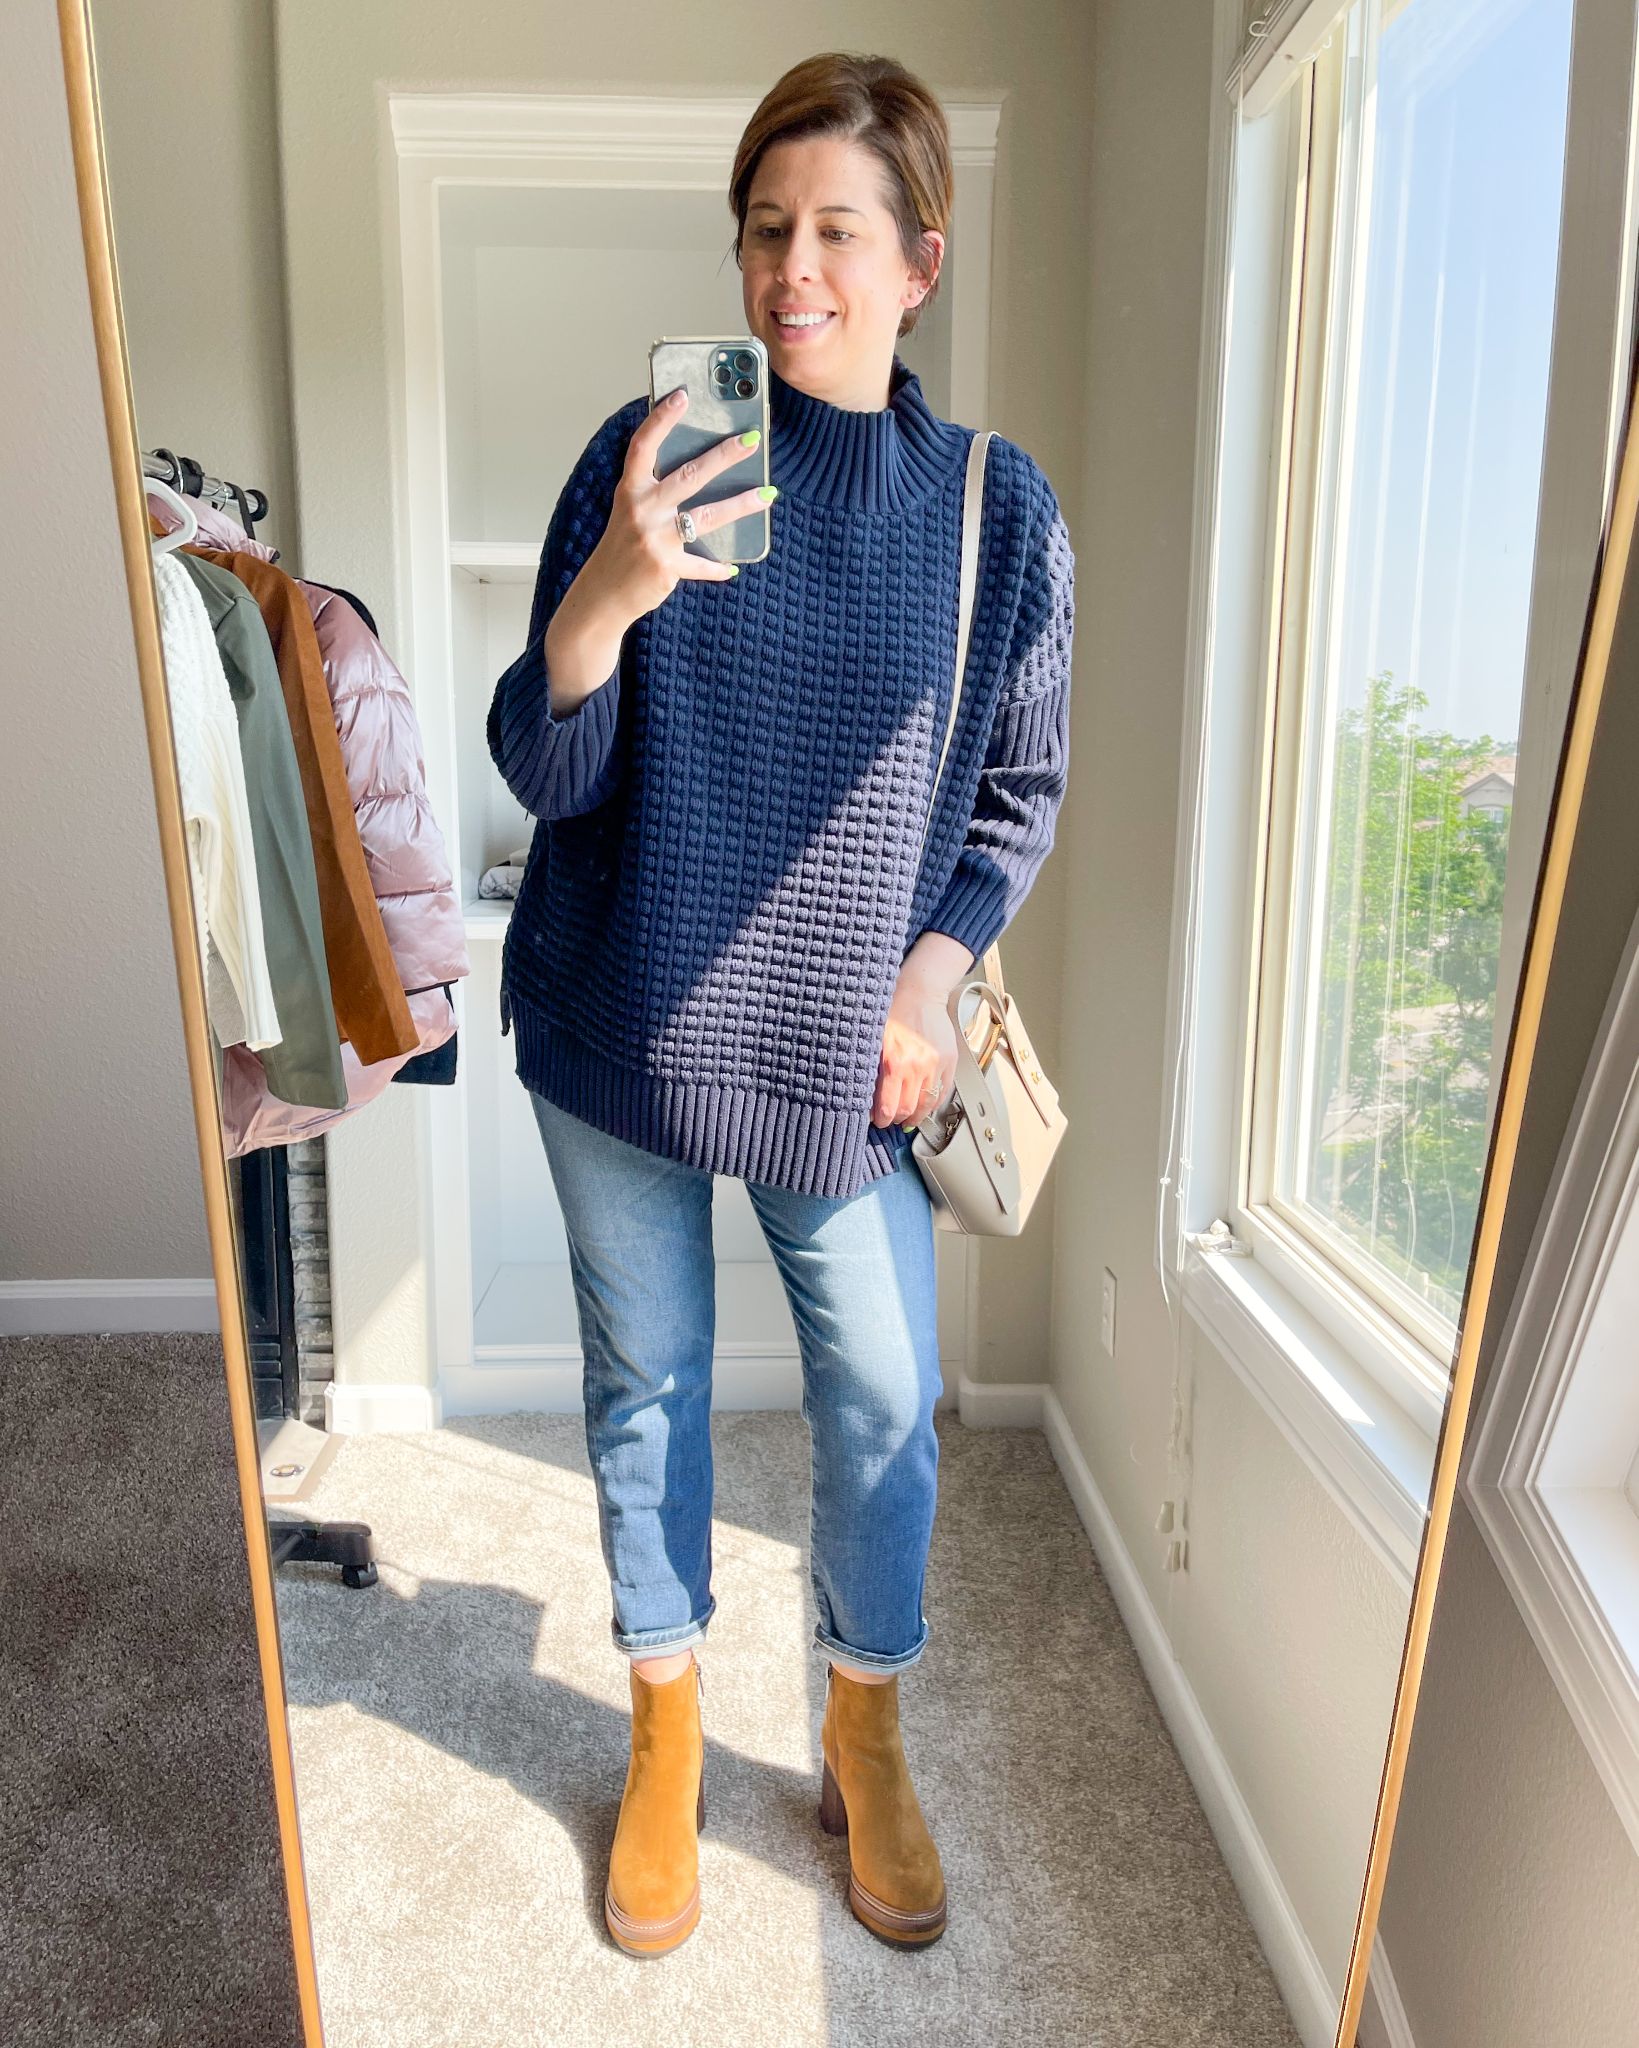 Based on the fashion picks for this Nordstrom sale, it seems we all have fall on the brain -- including those everyday staples that quickly turn into wardrobe workhorses.